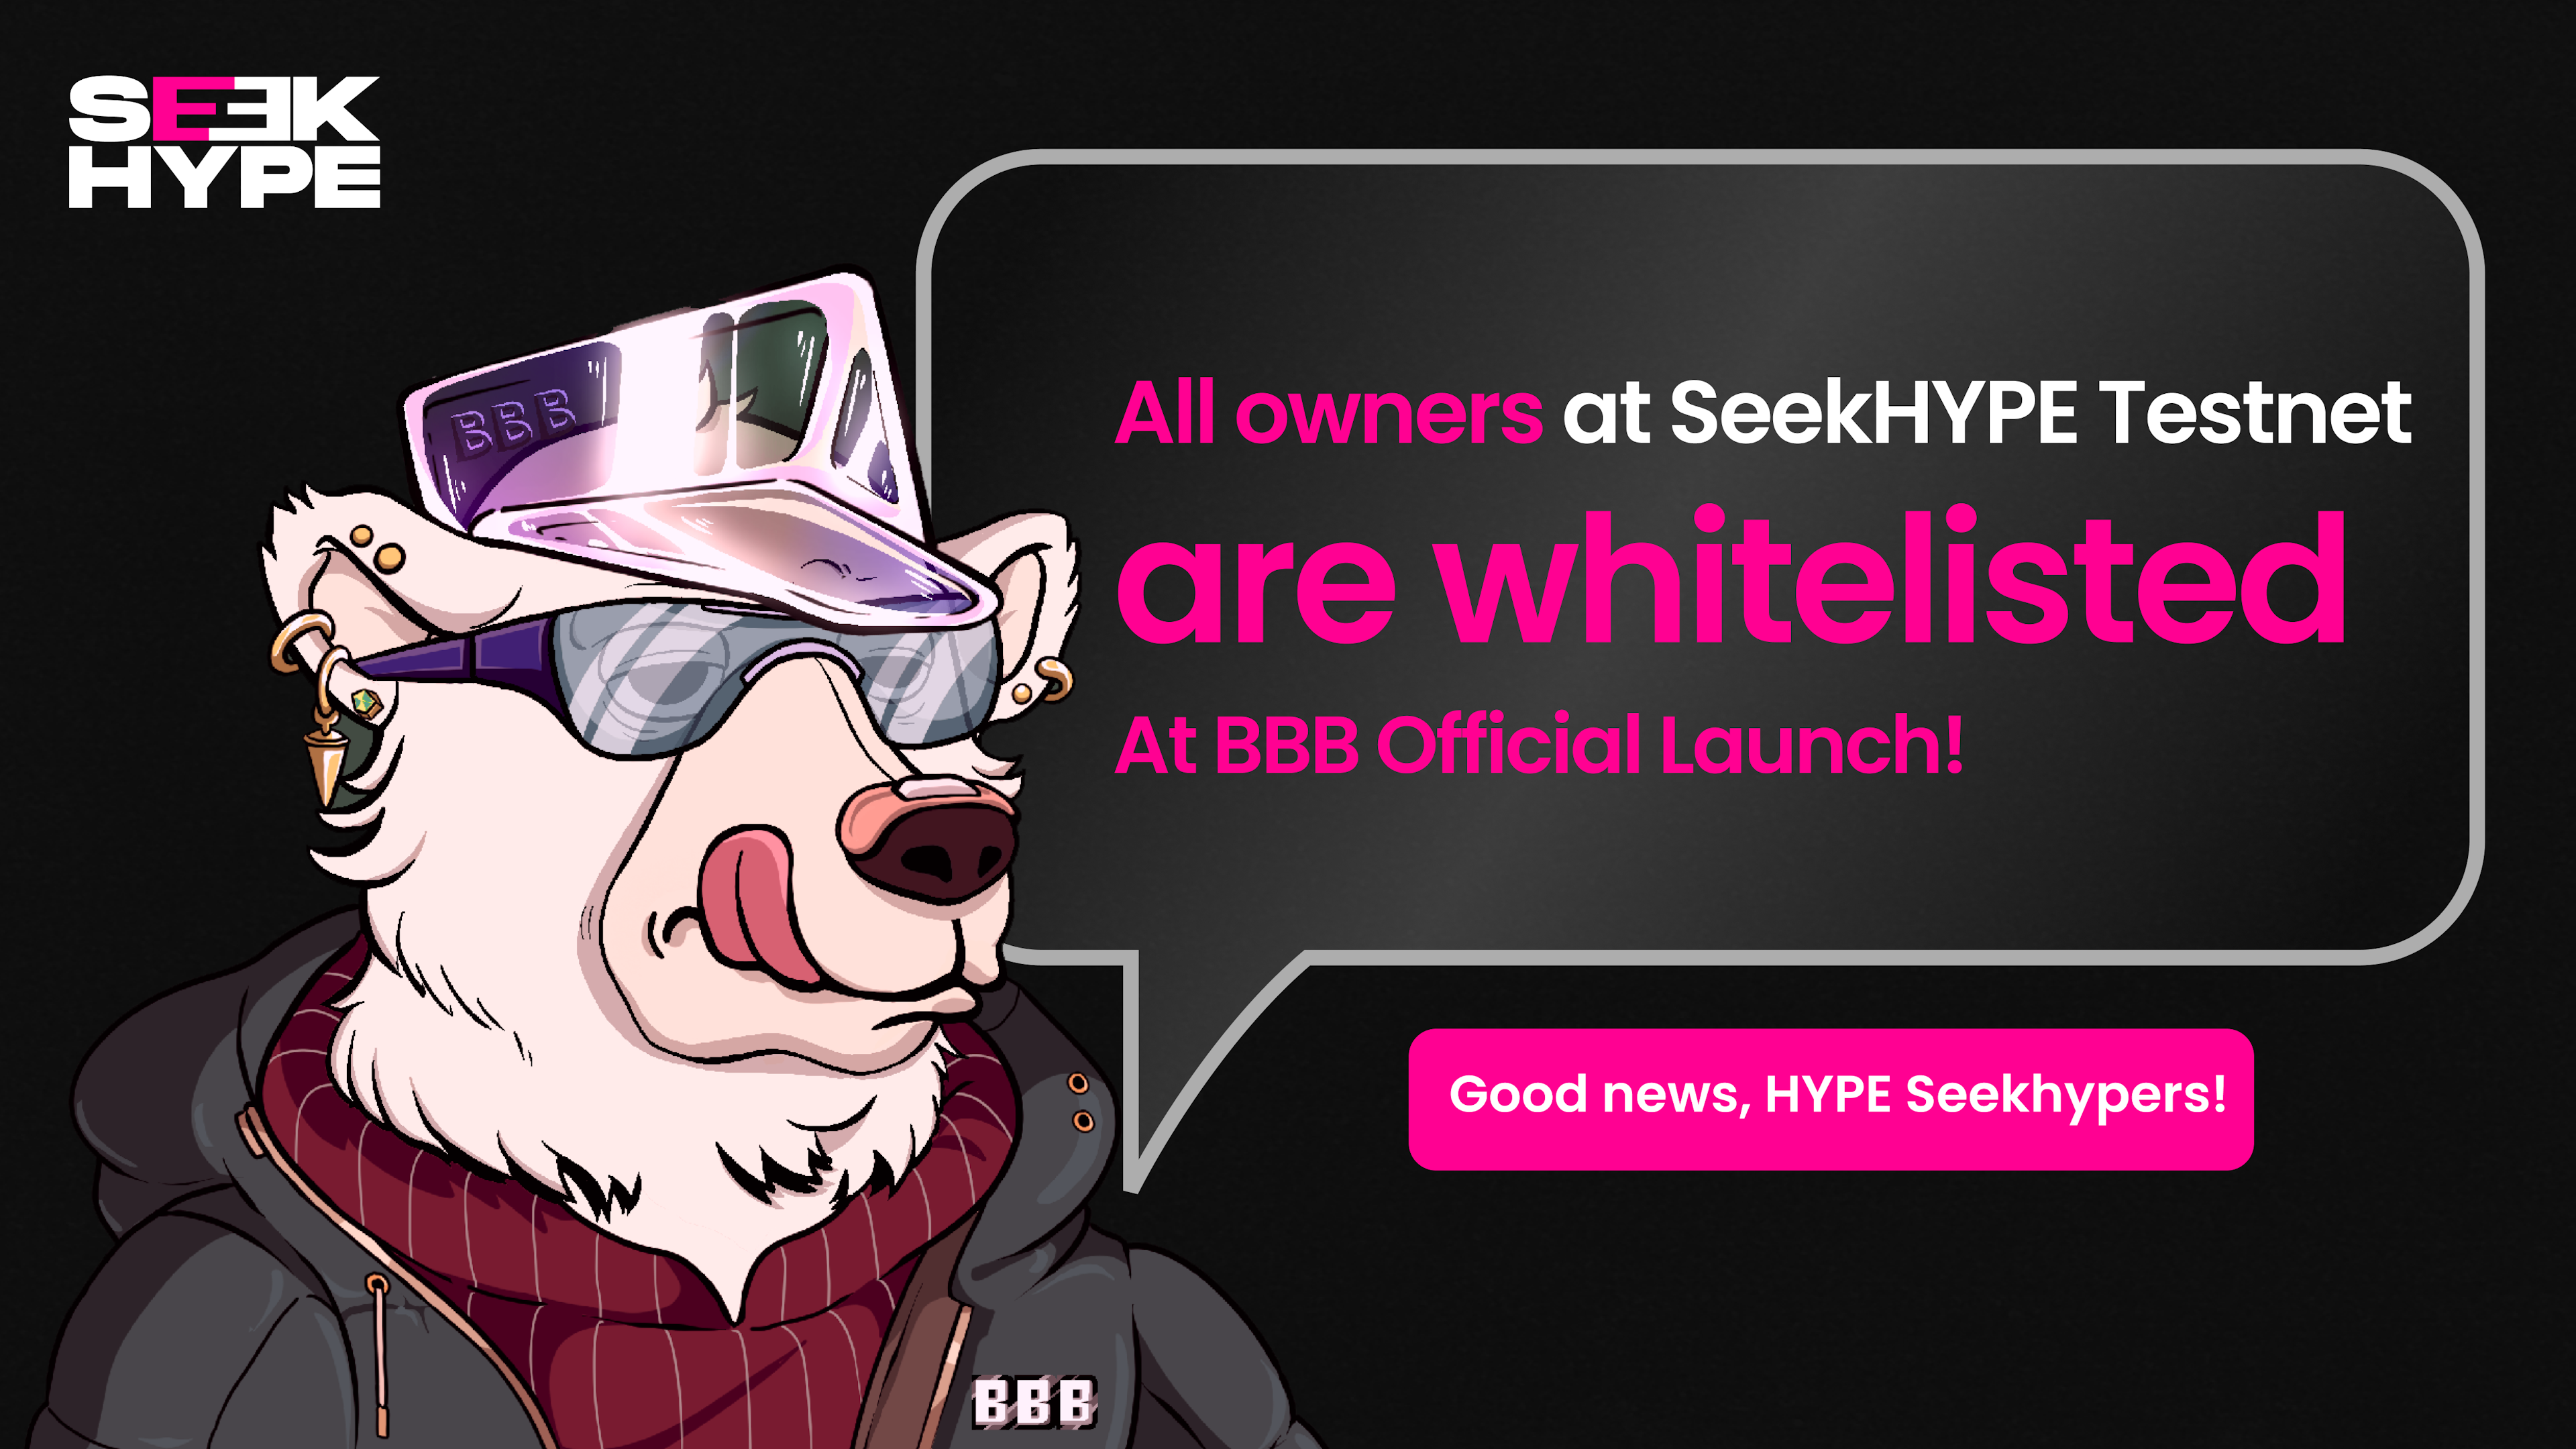 Business Bolar Bear NFT Collection announces whitelists for SeekHYPE testing owners.